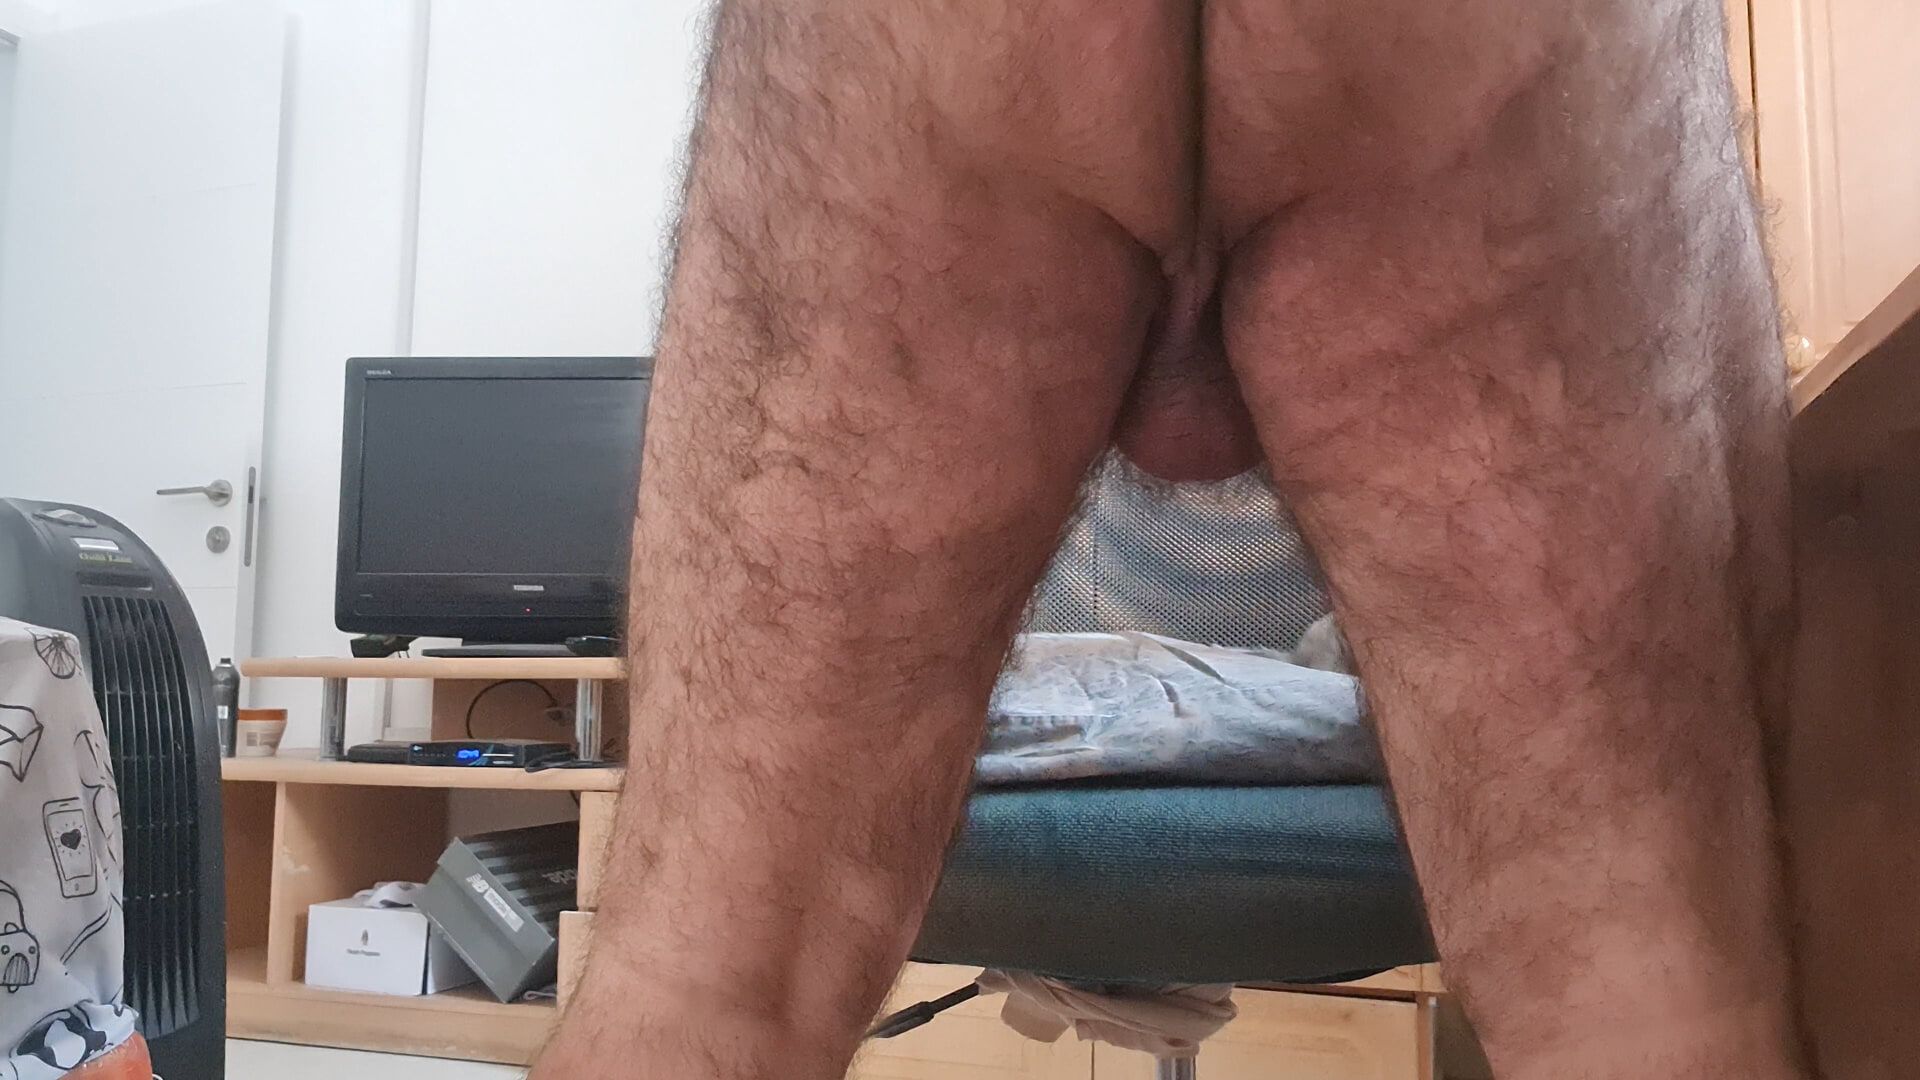 If you're into bear ass - this one's for you! ilovetobenaked #17